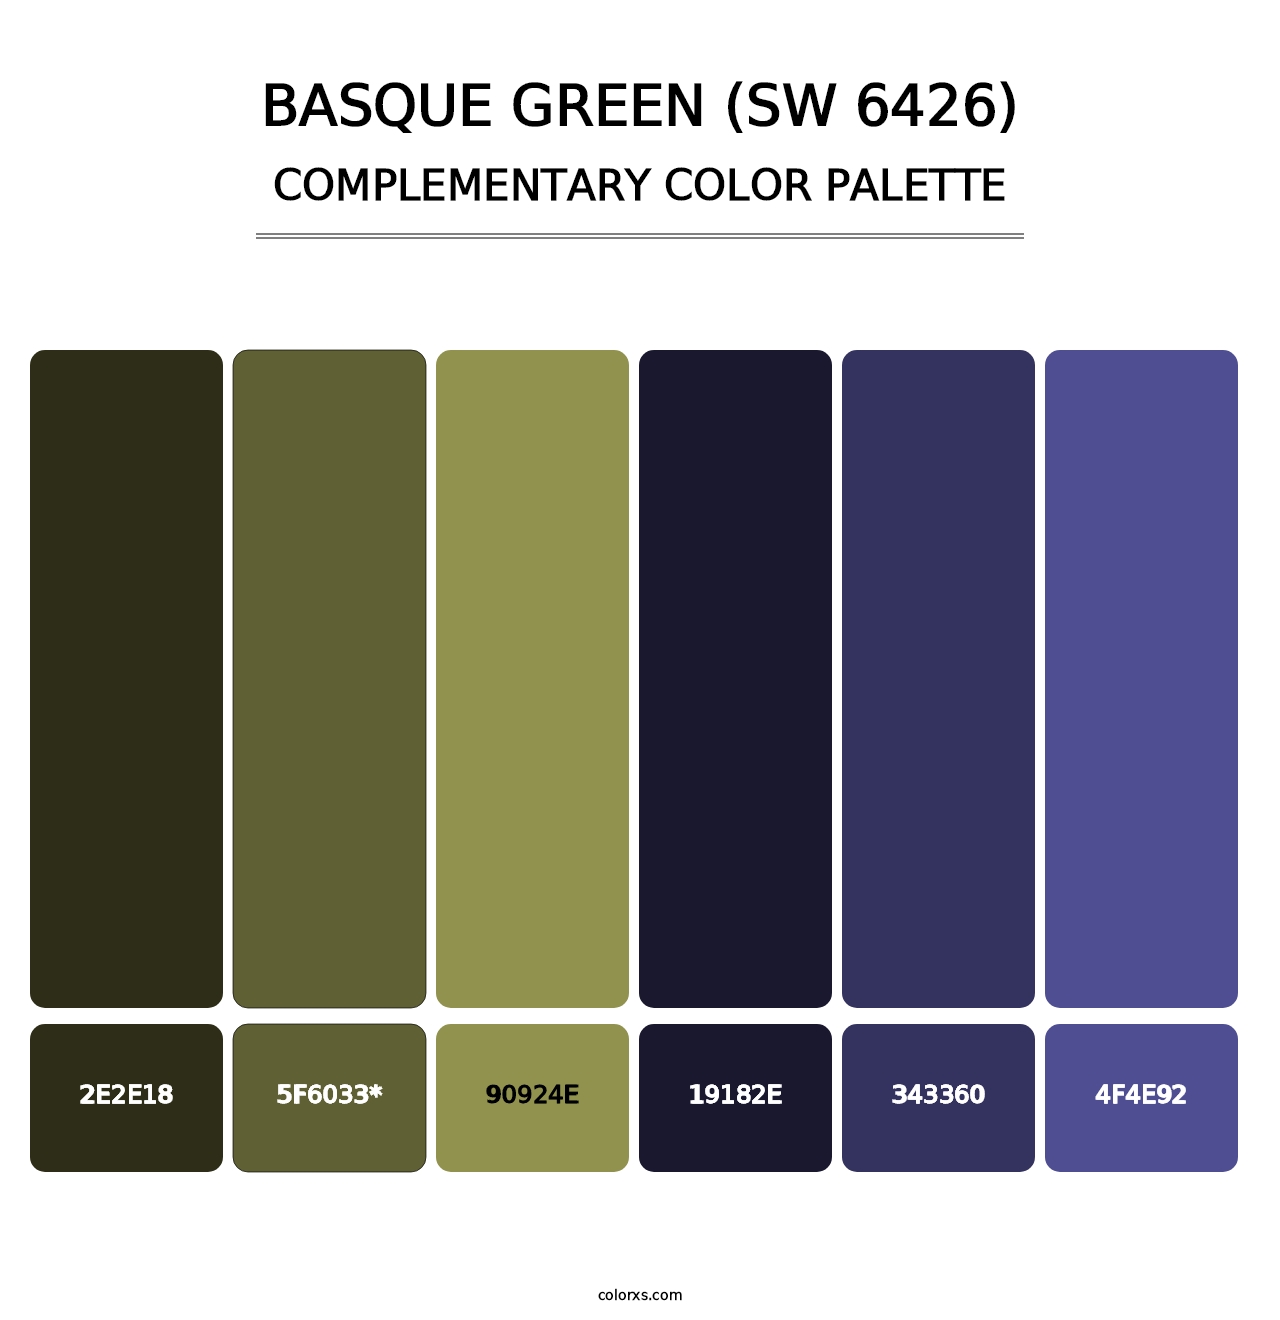 Basque Green (SW 6426) - Complementary Color Palette